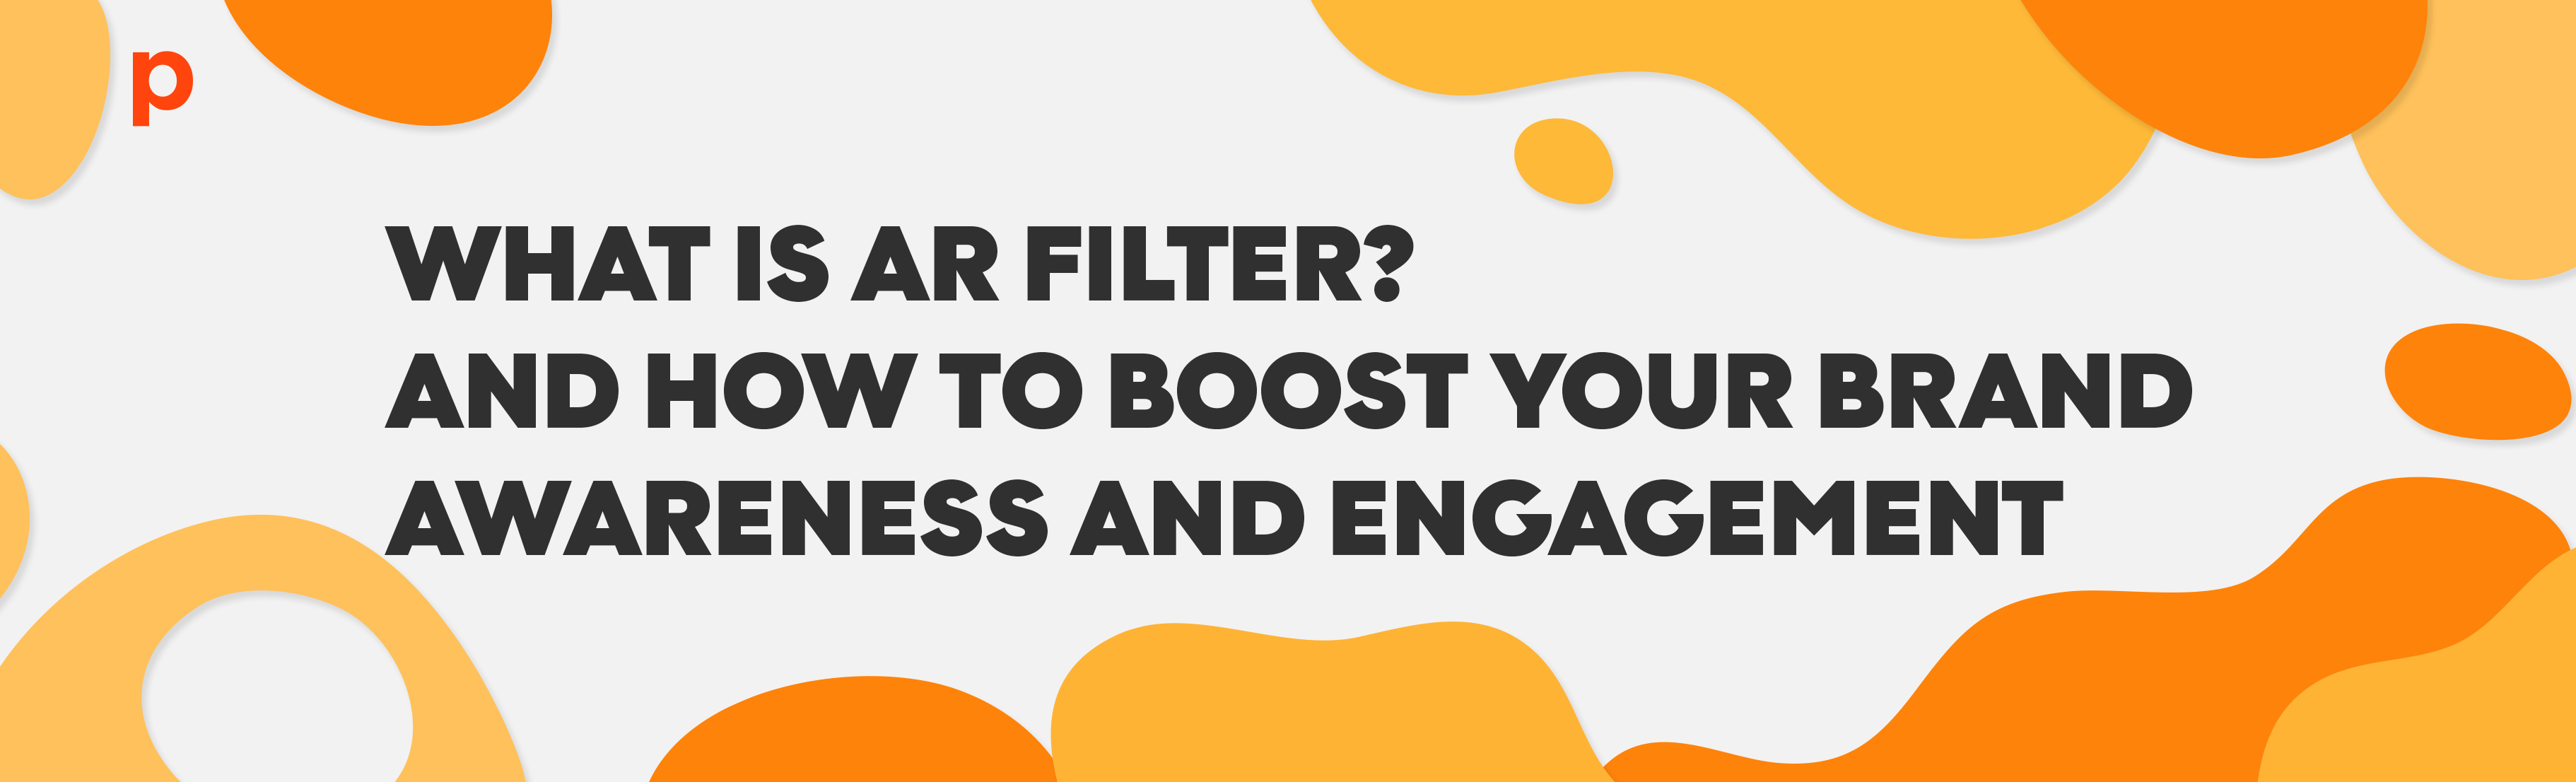 What is AR Filter?, and how to boost your brand awareness and engagement